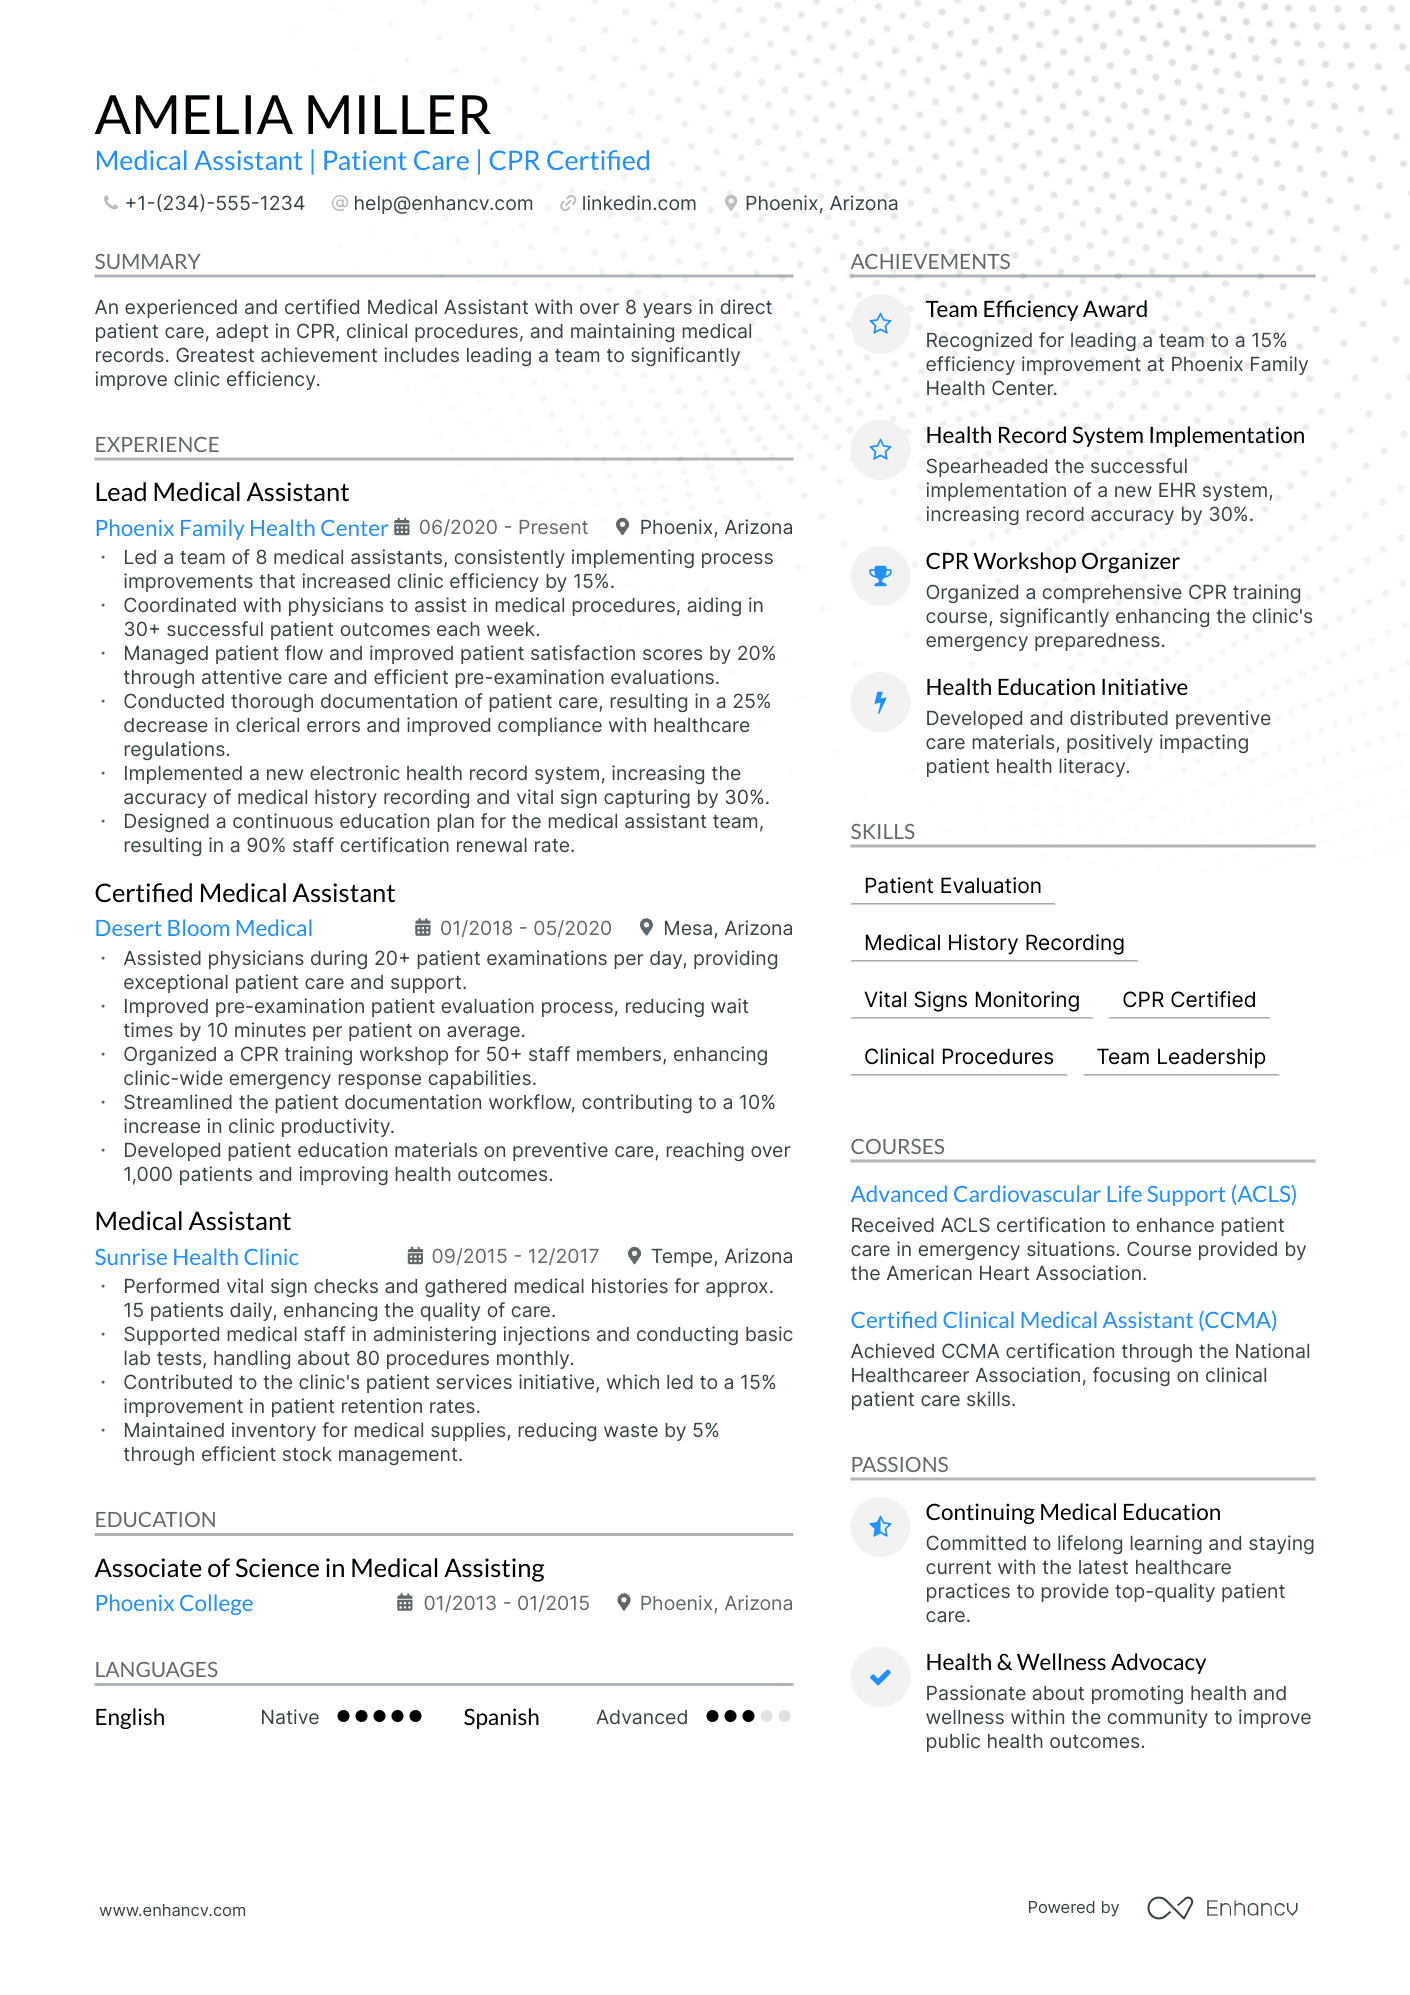 medical assistant profile for resume